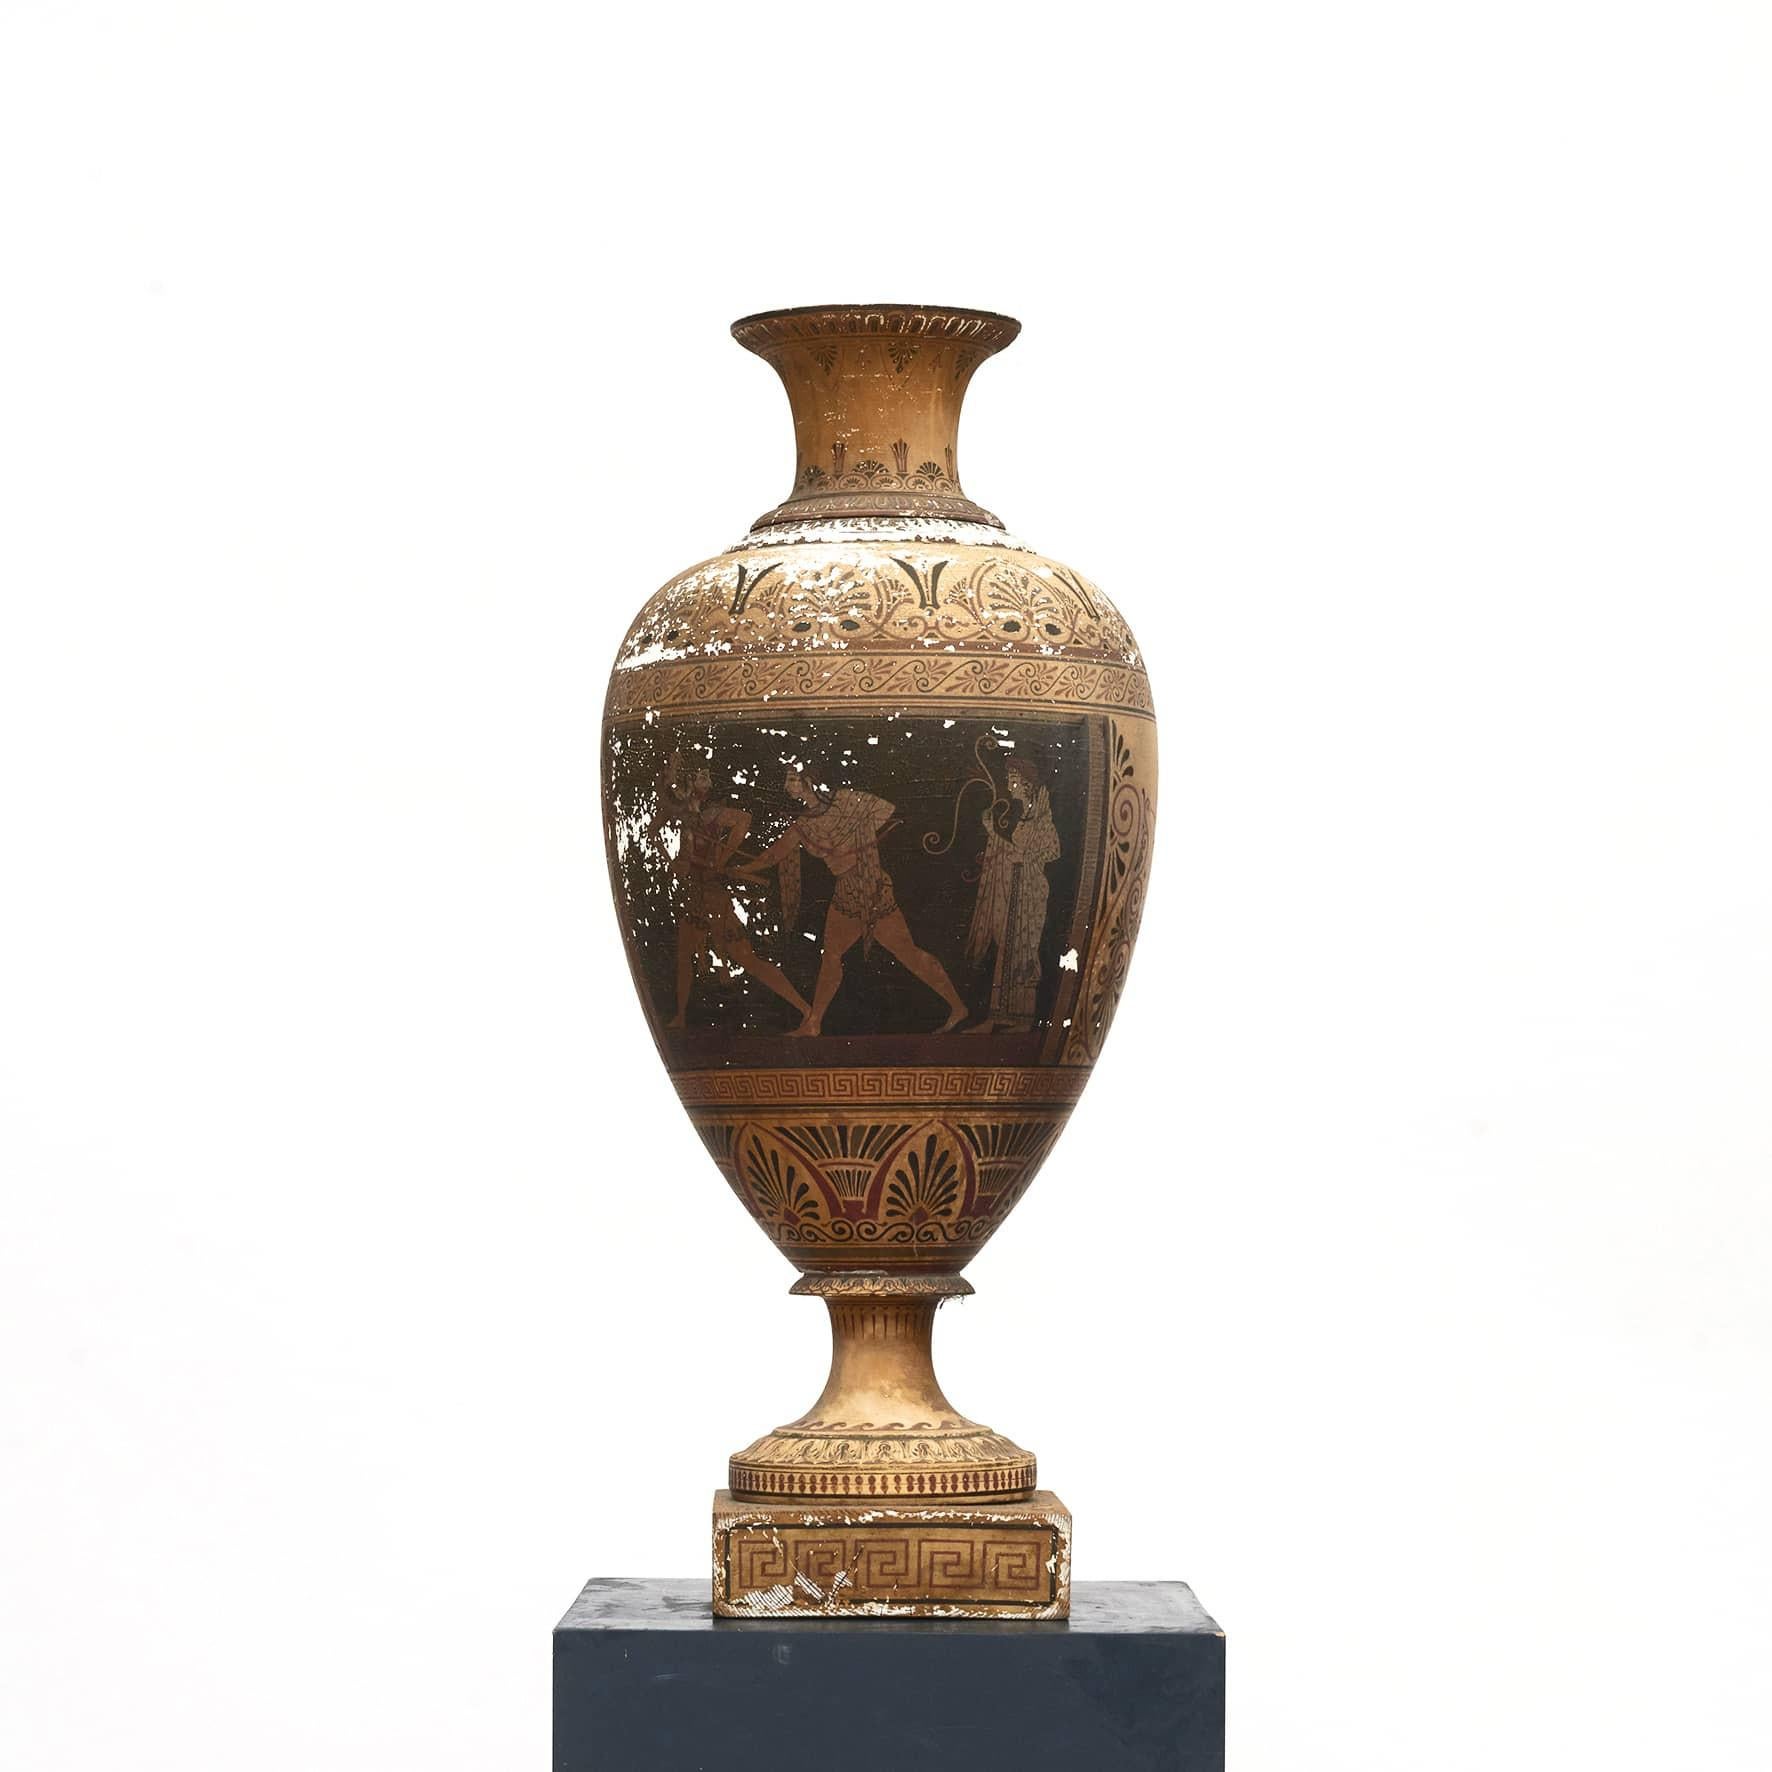 Rare large classicist 'Grand Tour' amphora in original untouched condition.
Made of terracotta with original polychrome Etruscan paintings on white chalk undercoat. On a square wooden base.
A very decorative and charming amphora, in untouched